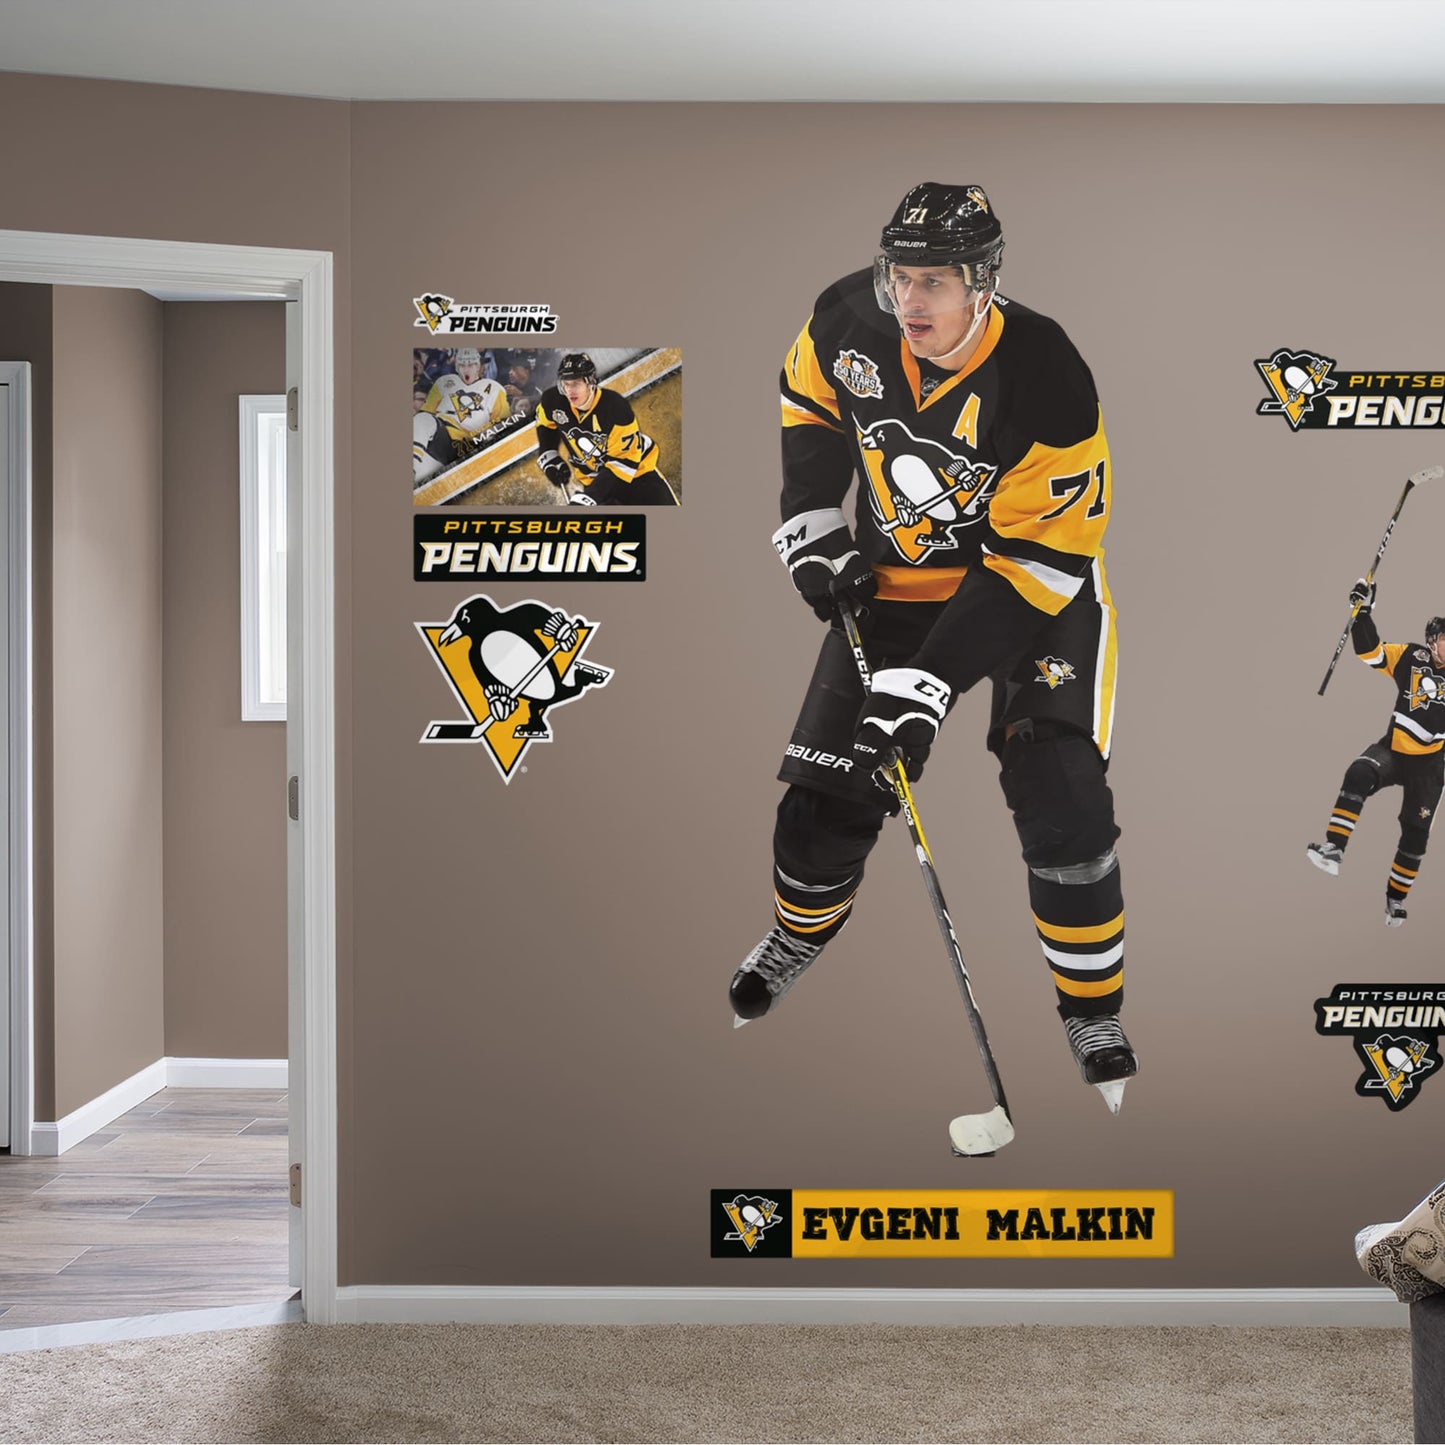 Athlete Only (32"W x 77"H) Before he became alternate captain for the Pittsburgh Penguins, Evgeni Malkin made a name for himself playing for his hometown club in Russia, the Metallurg Magnitogorsk. Drafted by the Penguins during the second round of 2014’s NHL draft, Geno has since become one of the Steel City team’s star standouts, and this durable, reusable wall decal makes No. 71 a regular fixture around the office, bar or bedroom.